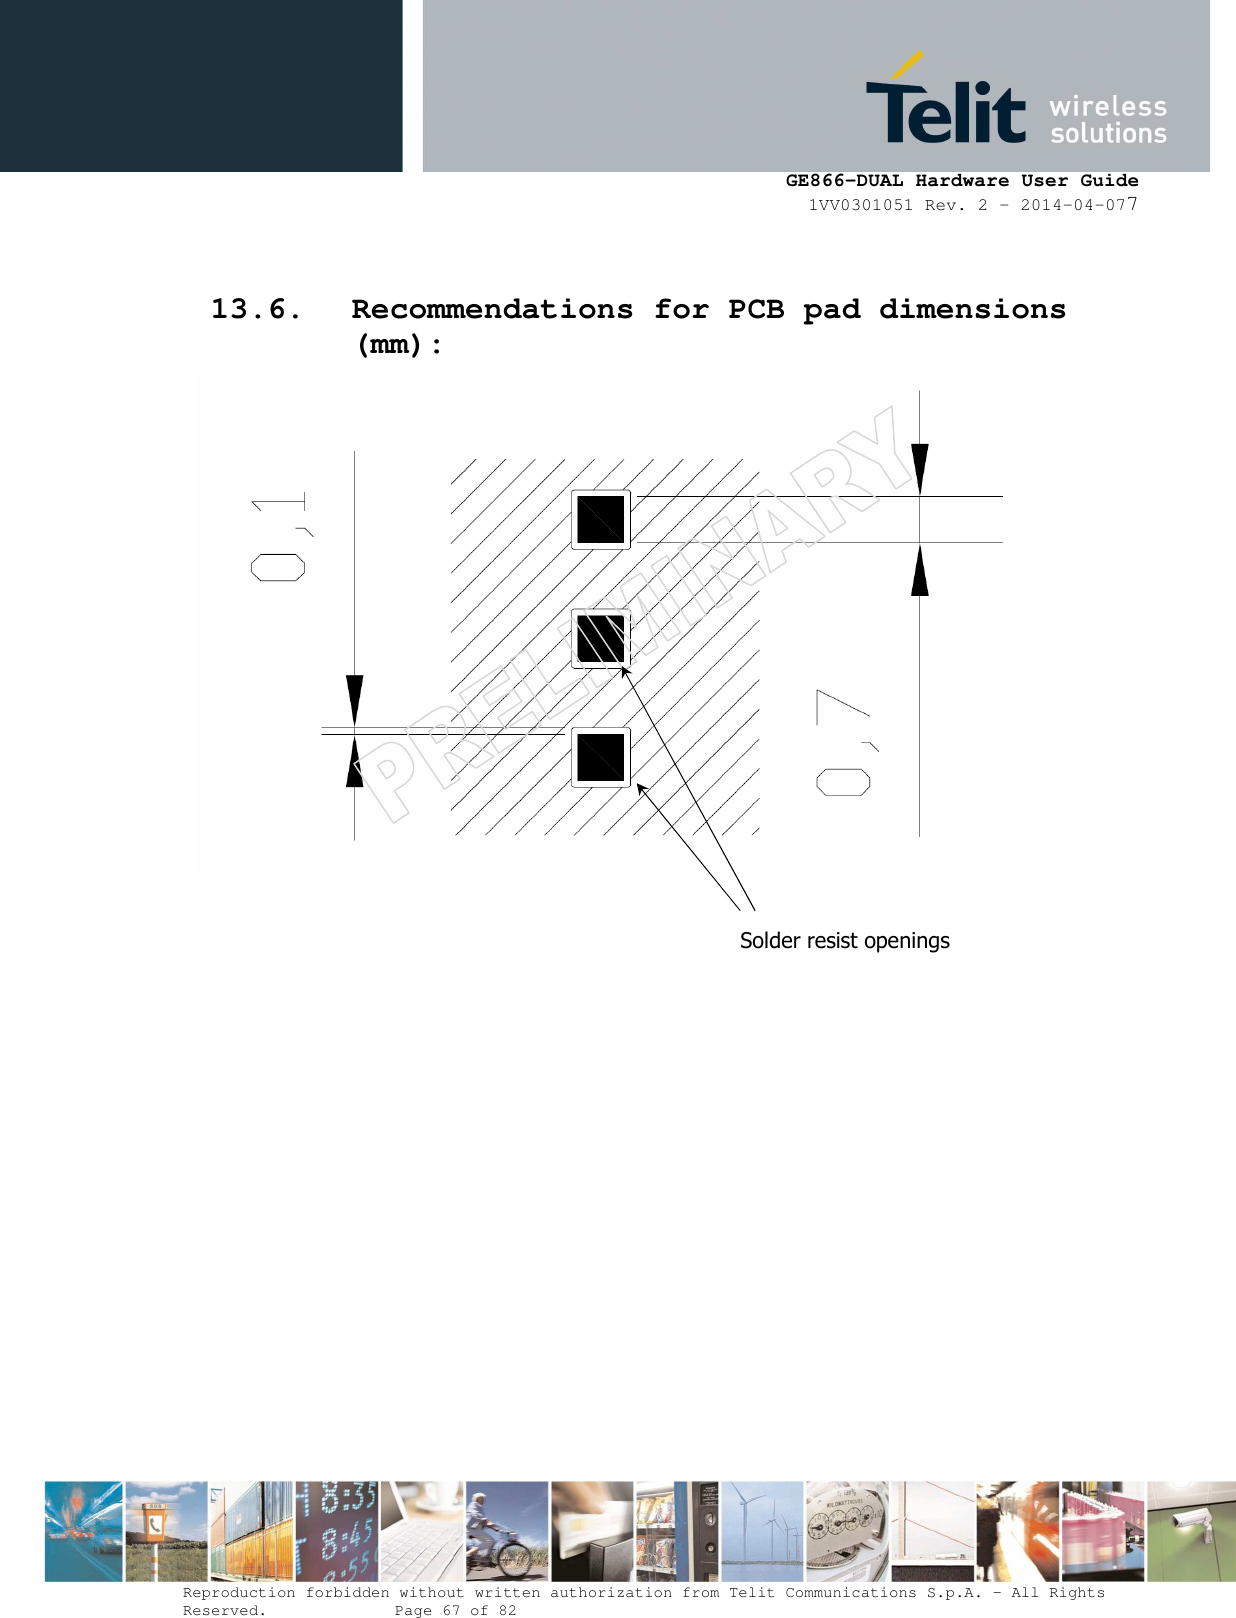      GE866-DUAL Hardware User Guide 1VV0301051 Rev. 2 – 2014-04-077  Reproduction forbidden without written authorization from Telit Communications S.p.A. - All Rights Reserved.    Page 67 of 82 Mod. 0805 2011-07 Rev.2  13.6. Recommendations for PCB pad dimensions (mm):                                   Solder resist openings 